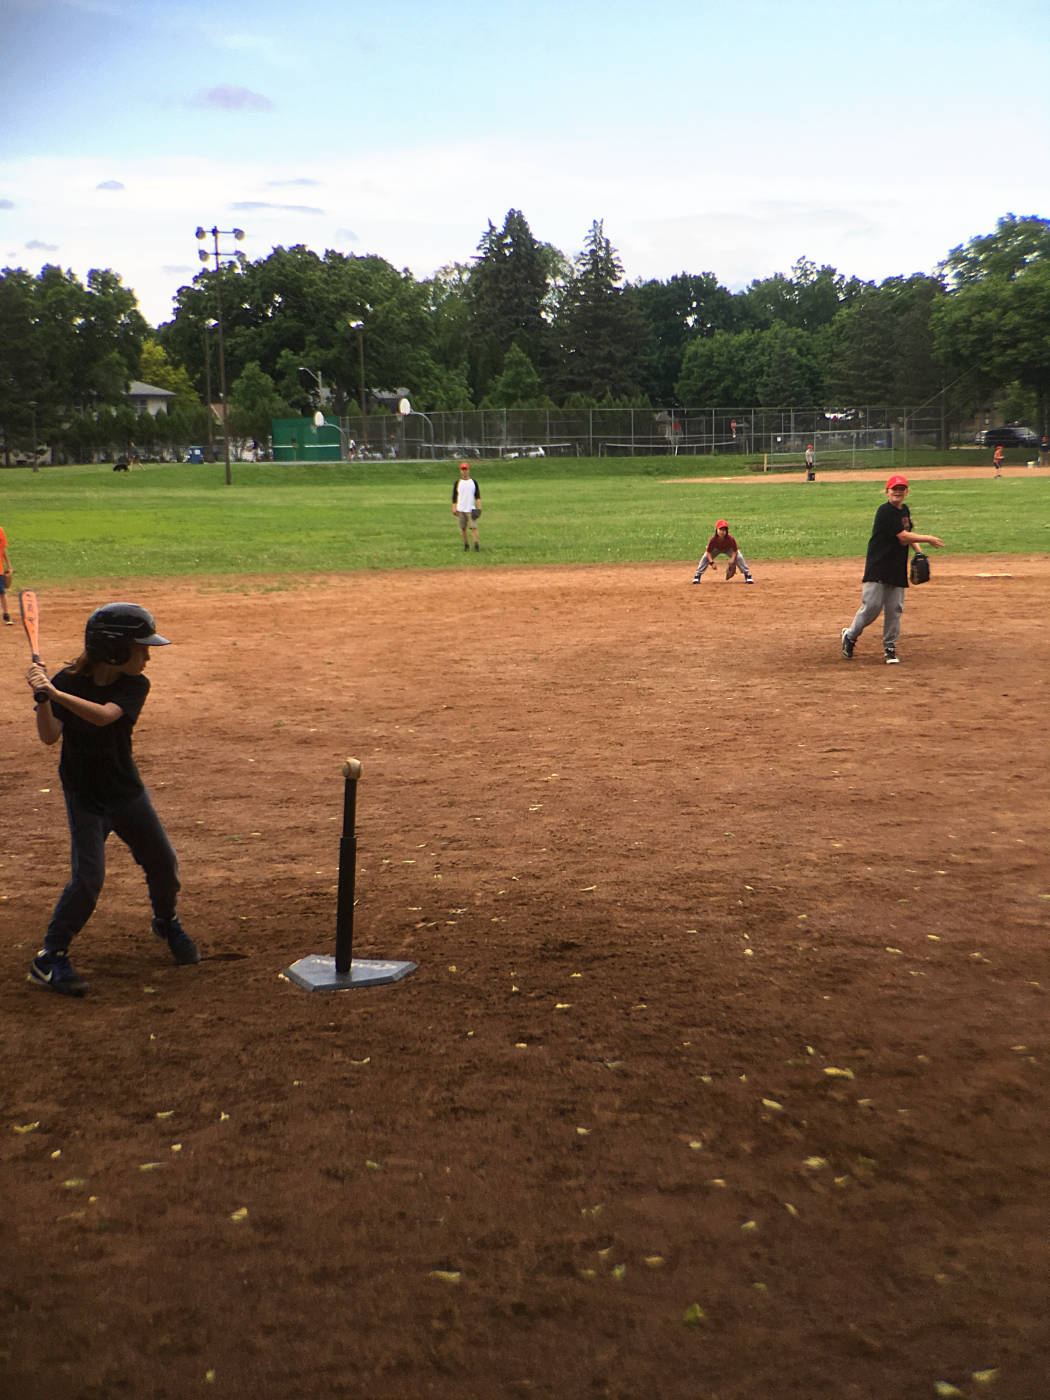 young person at bat with a baseball on a pole seen from behind homeplate looking out at other kids on the diamond